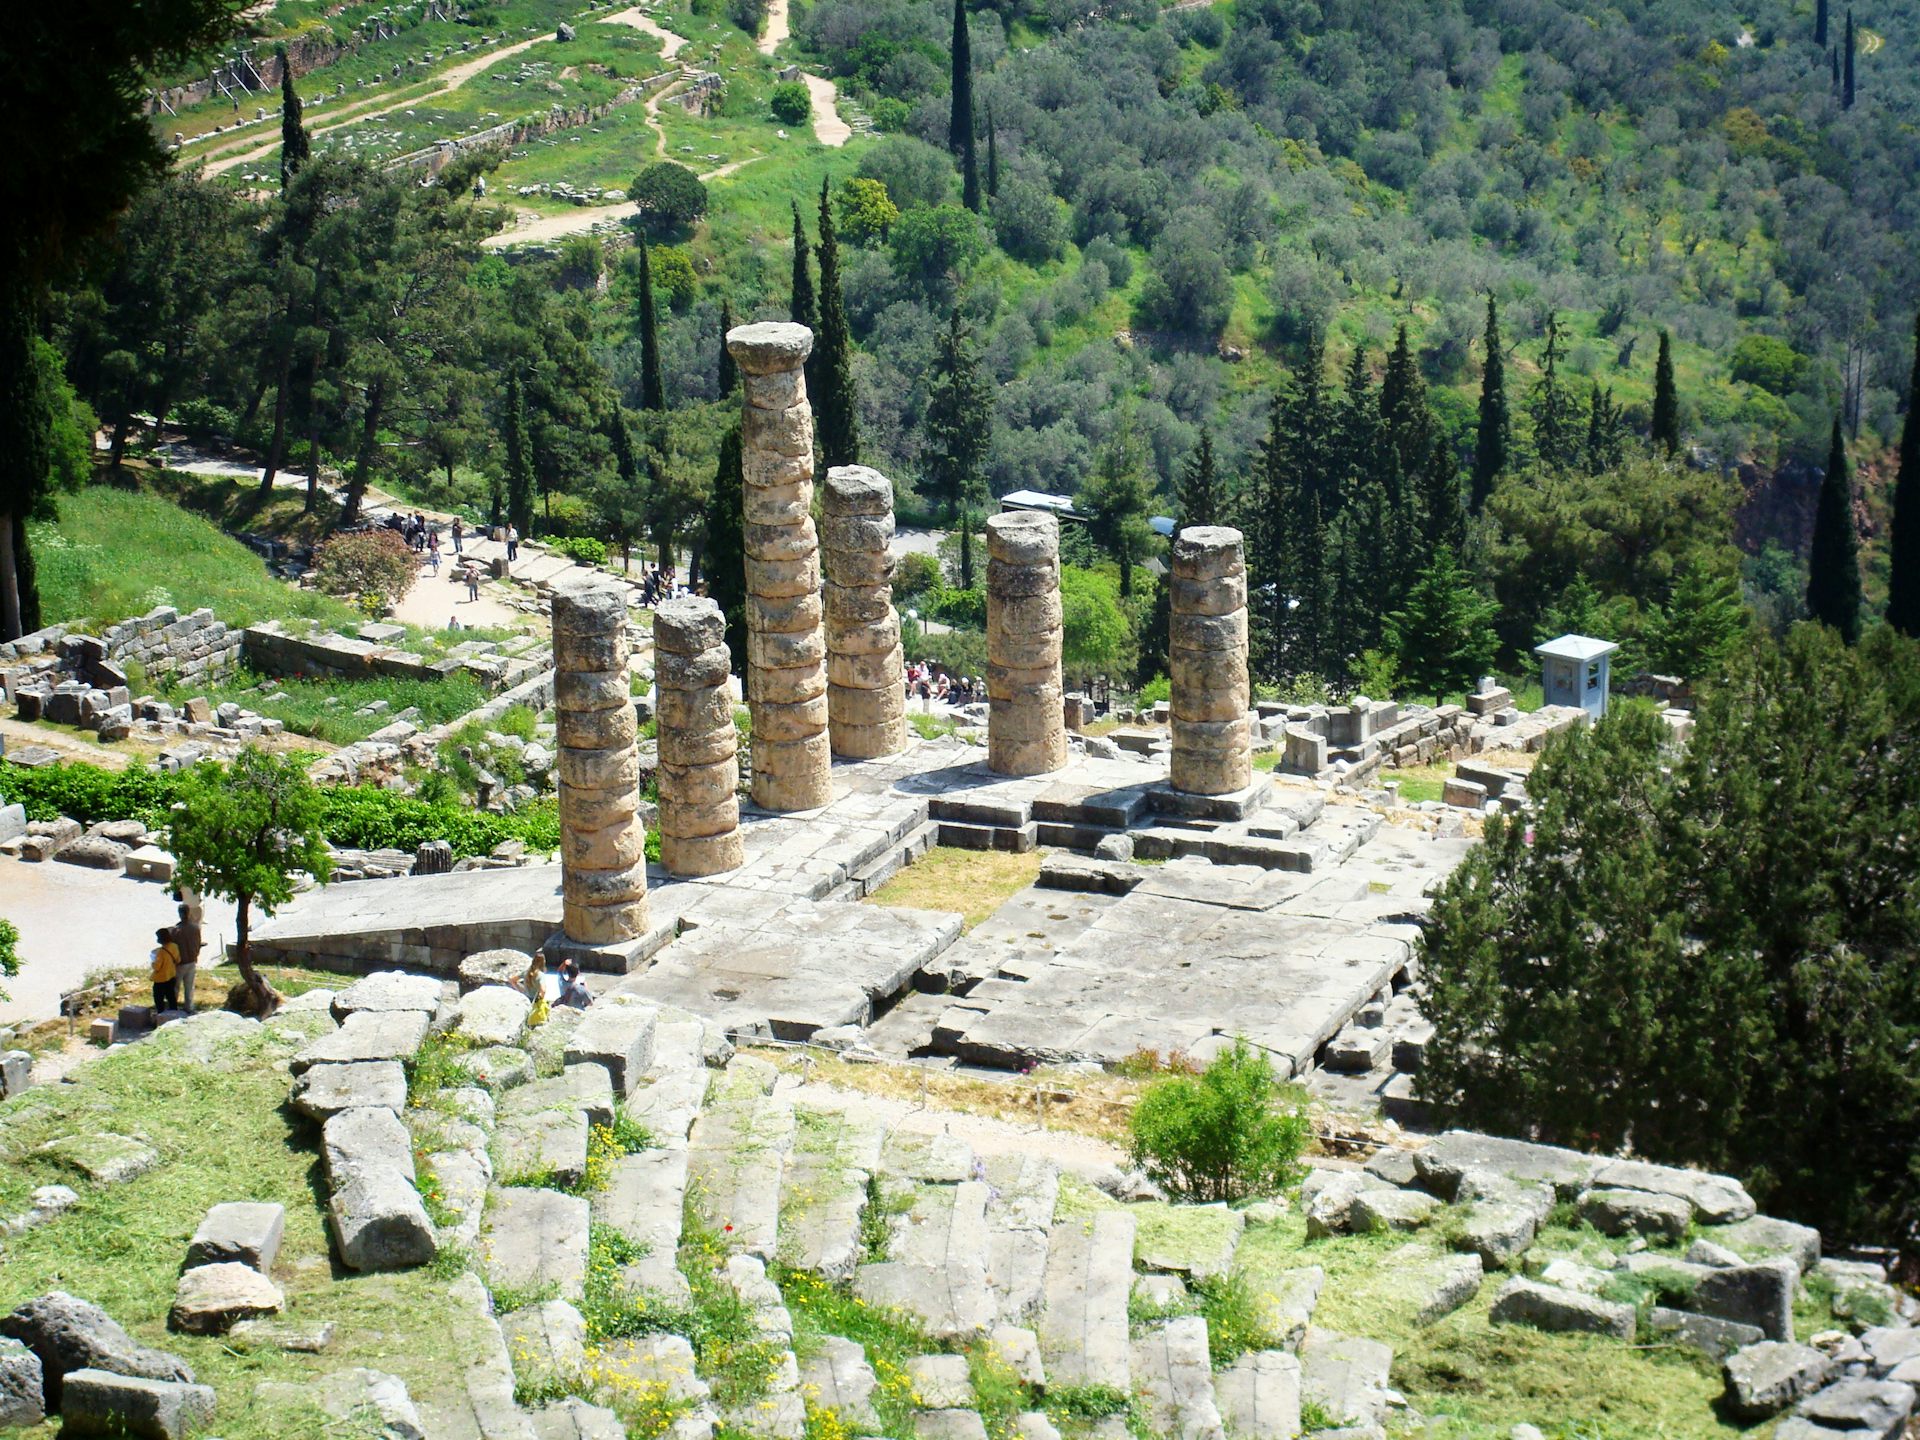 oracle at delphi